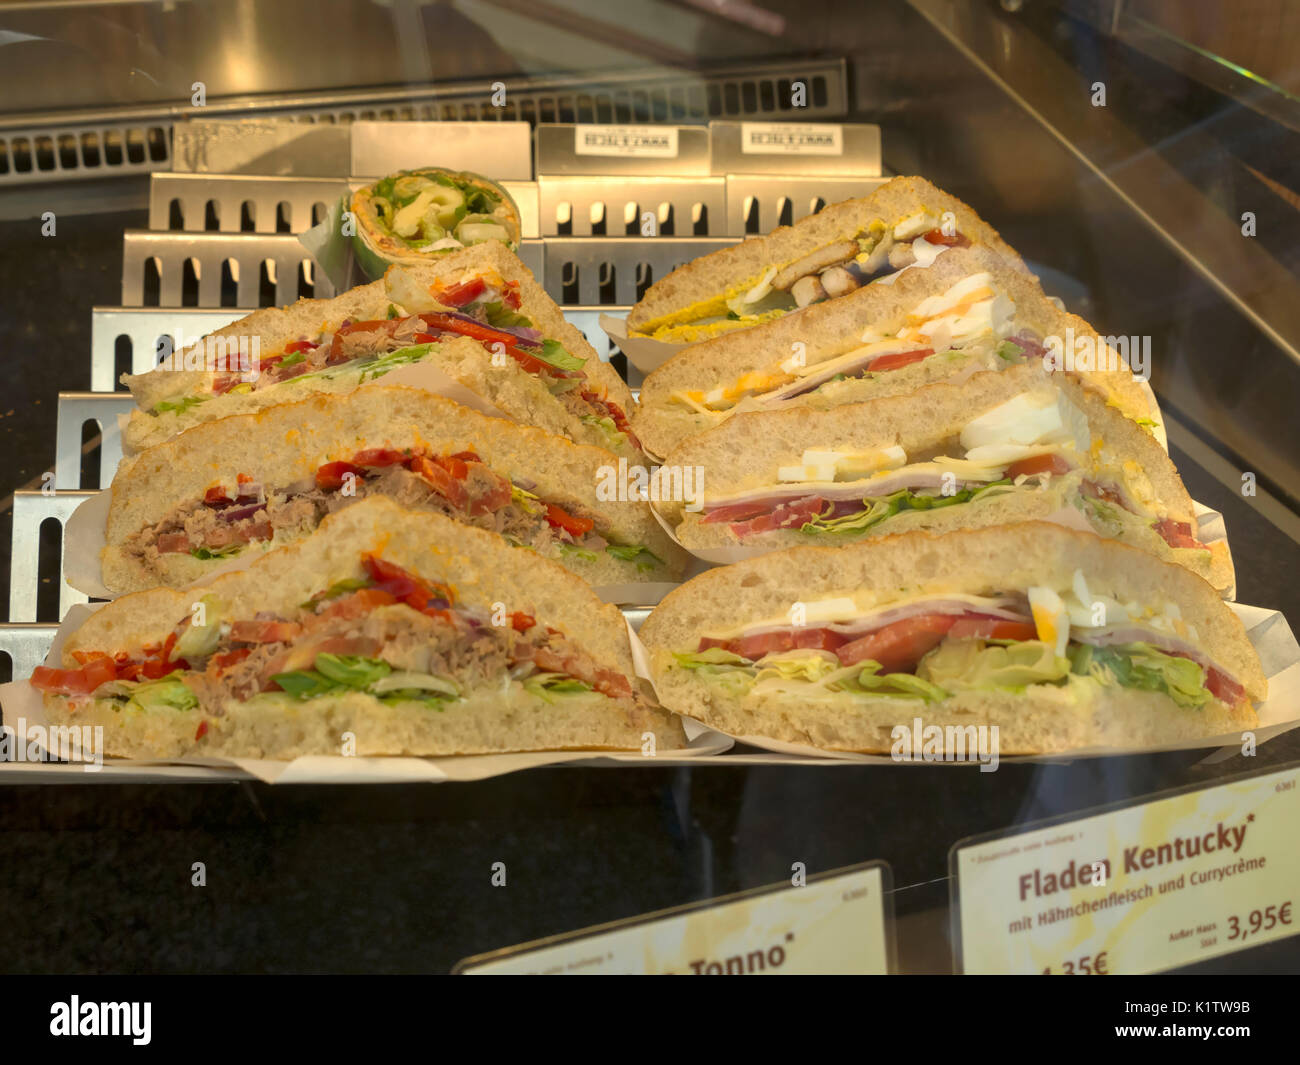 Sandwich display in a cafe in Cochem, Germany Stock Photo